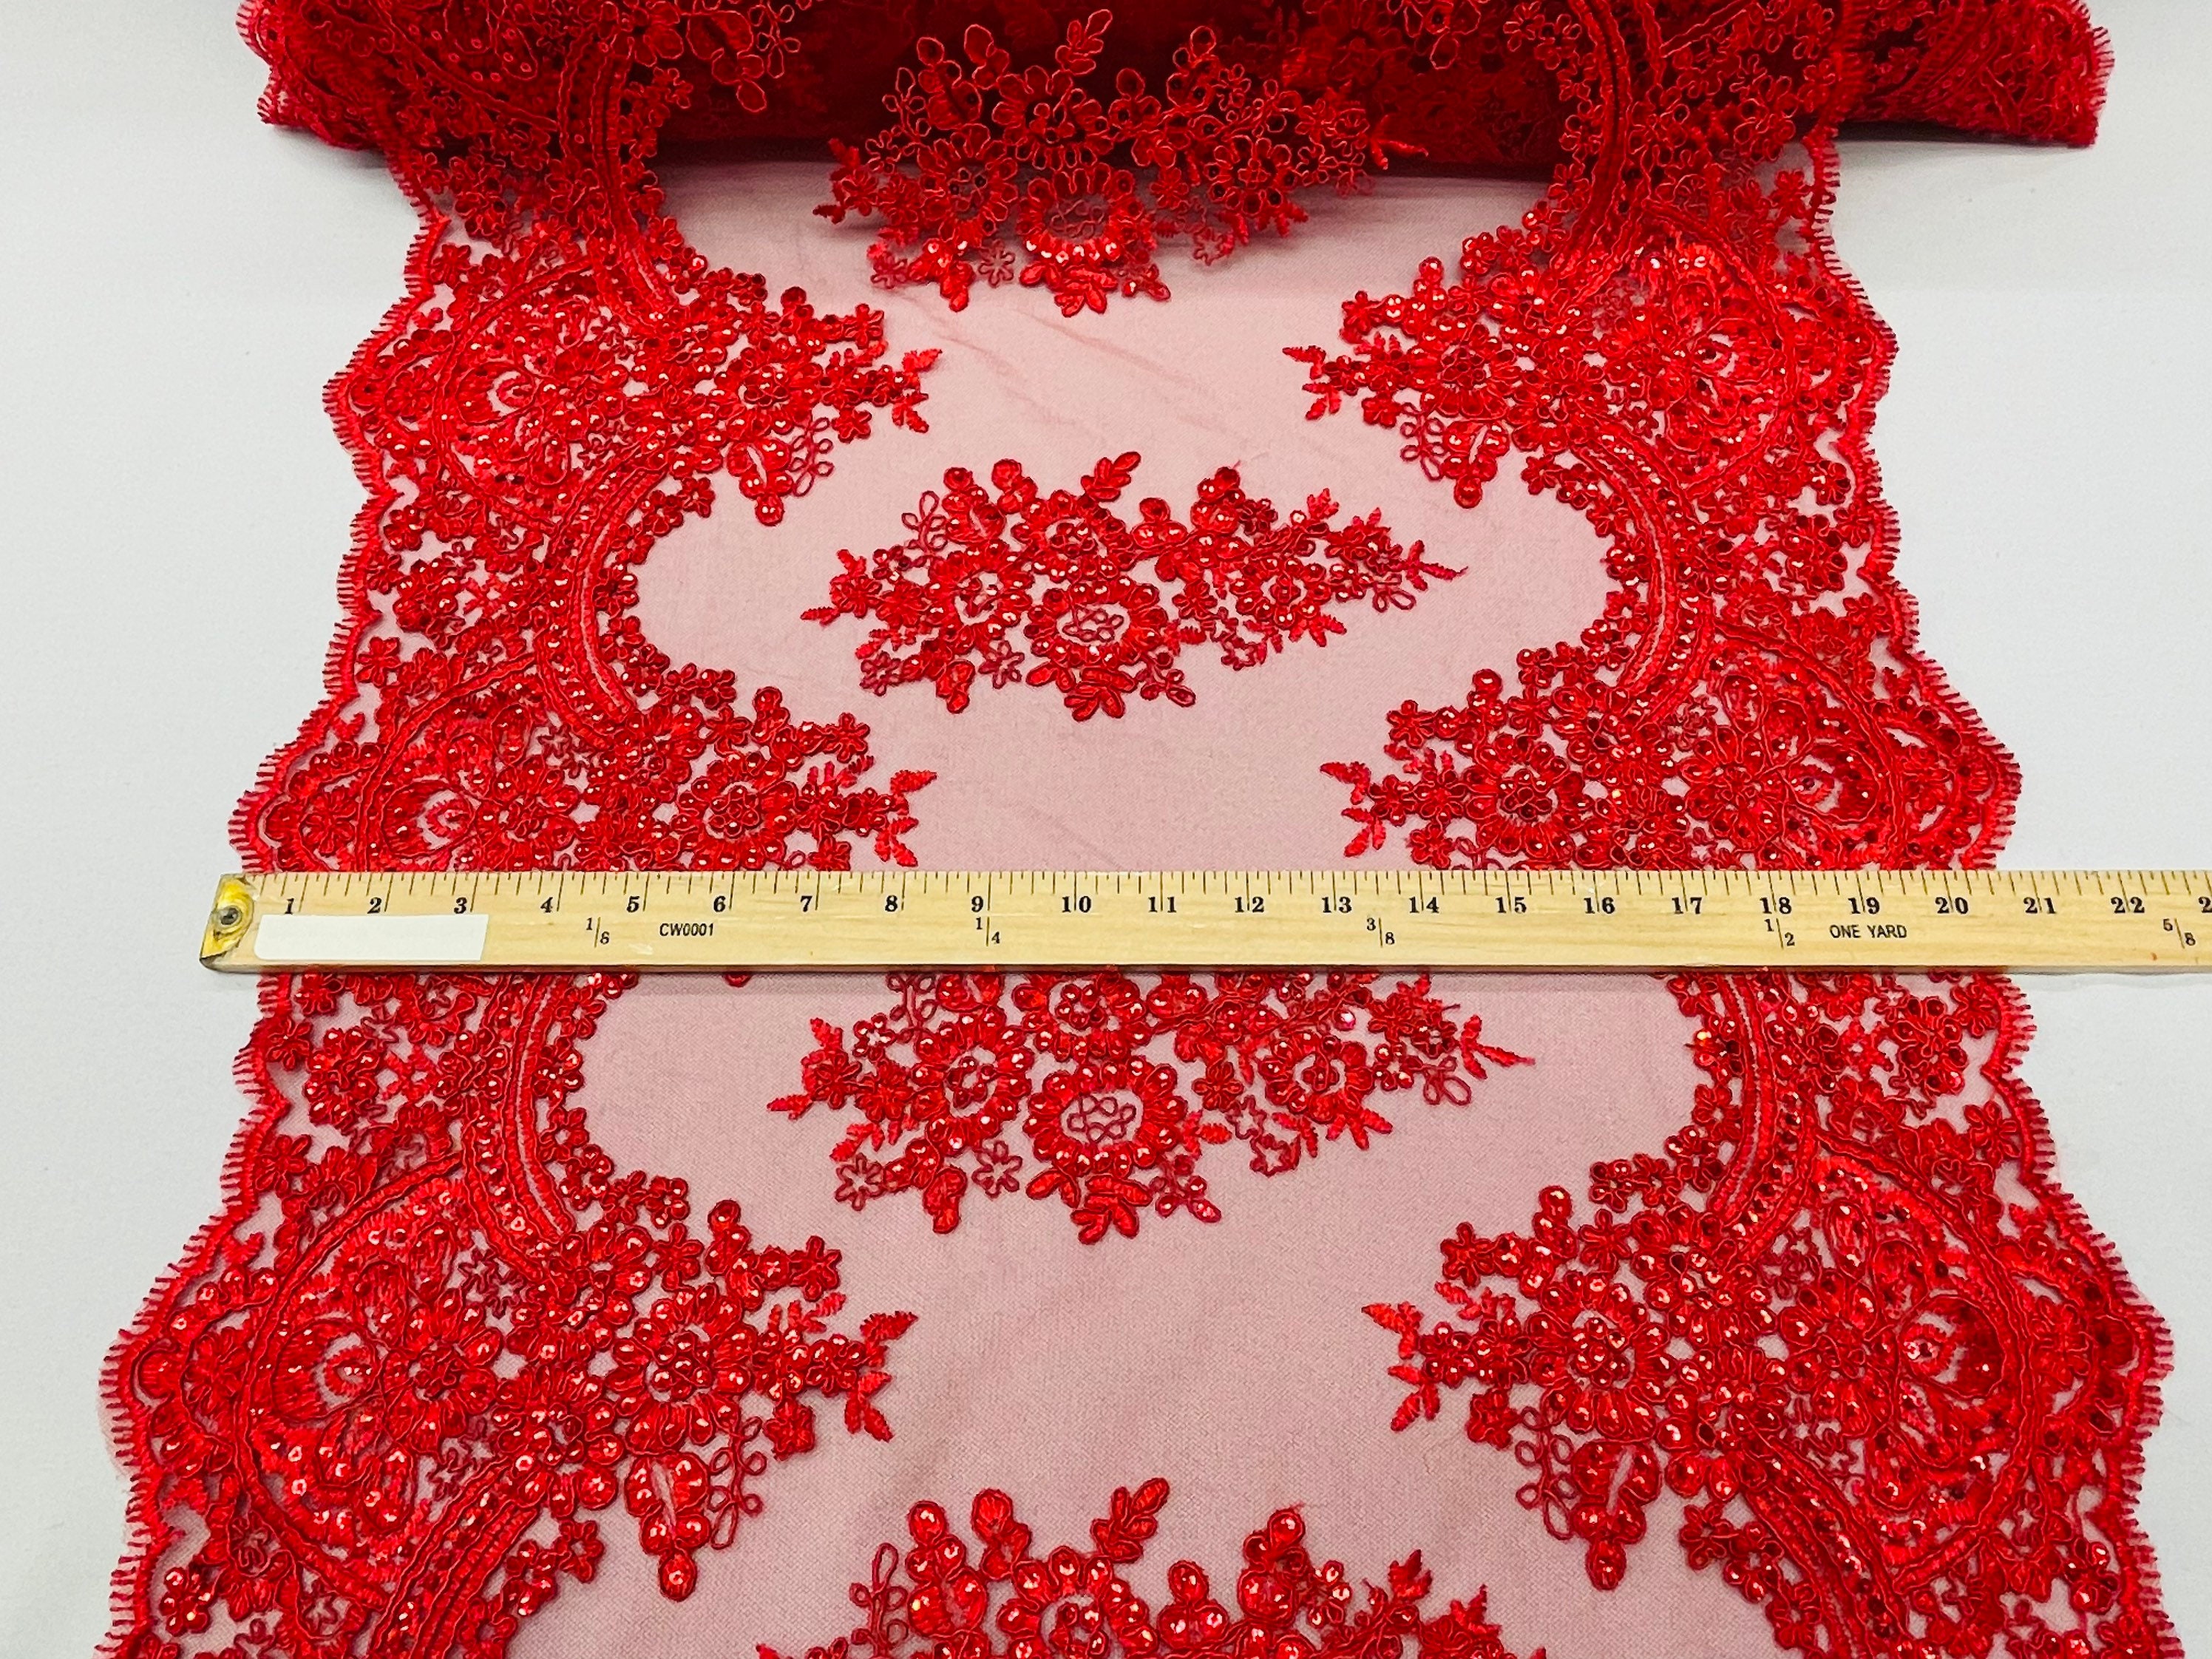 Red Lace Fabric 